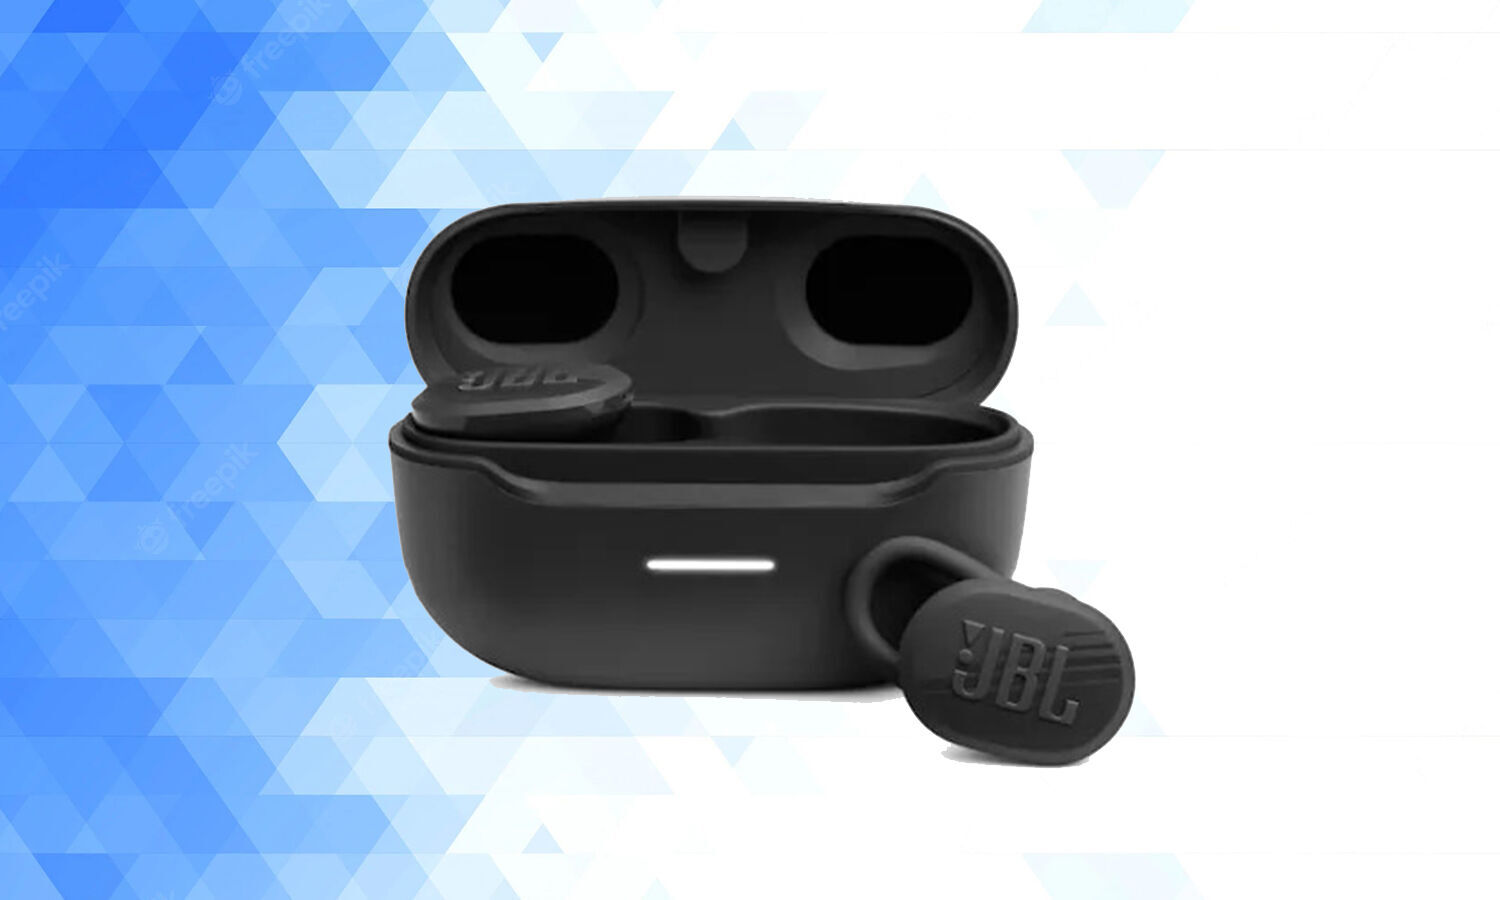 JBL Endurance Race: JBL Launches Its New Wireless Earphone, Will Give Up To 30 Hours Battery Backup